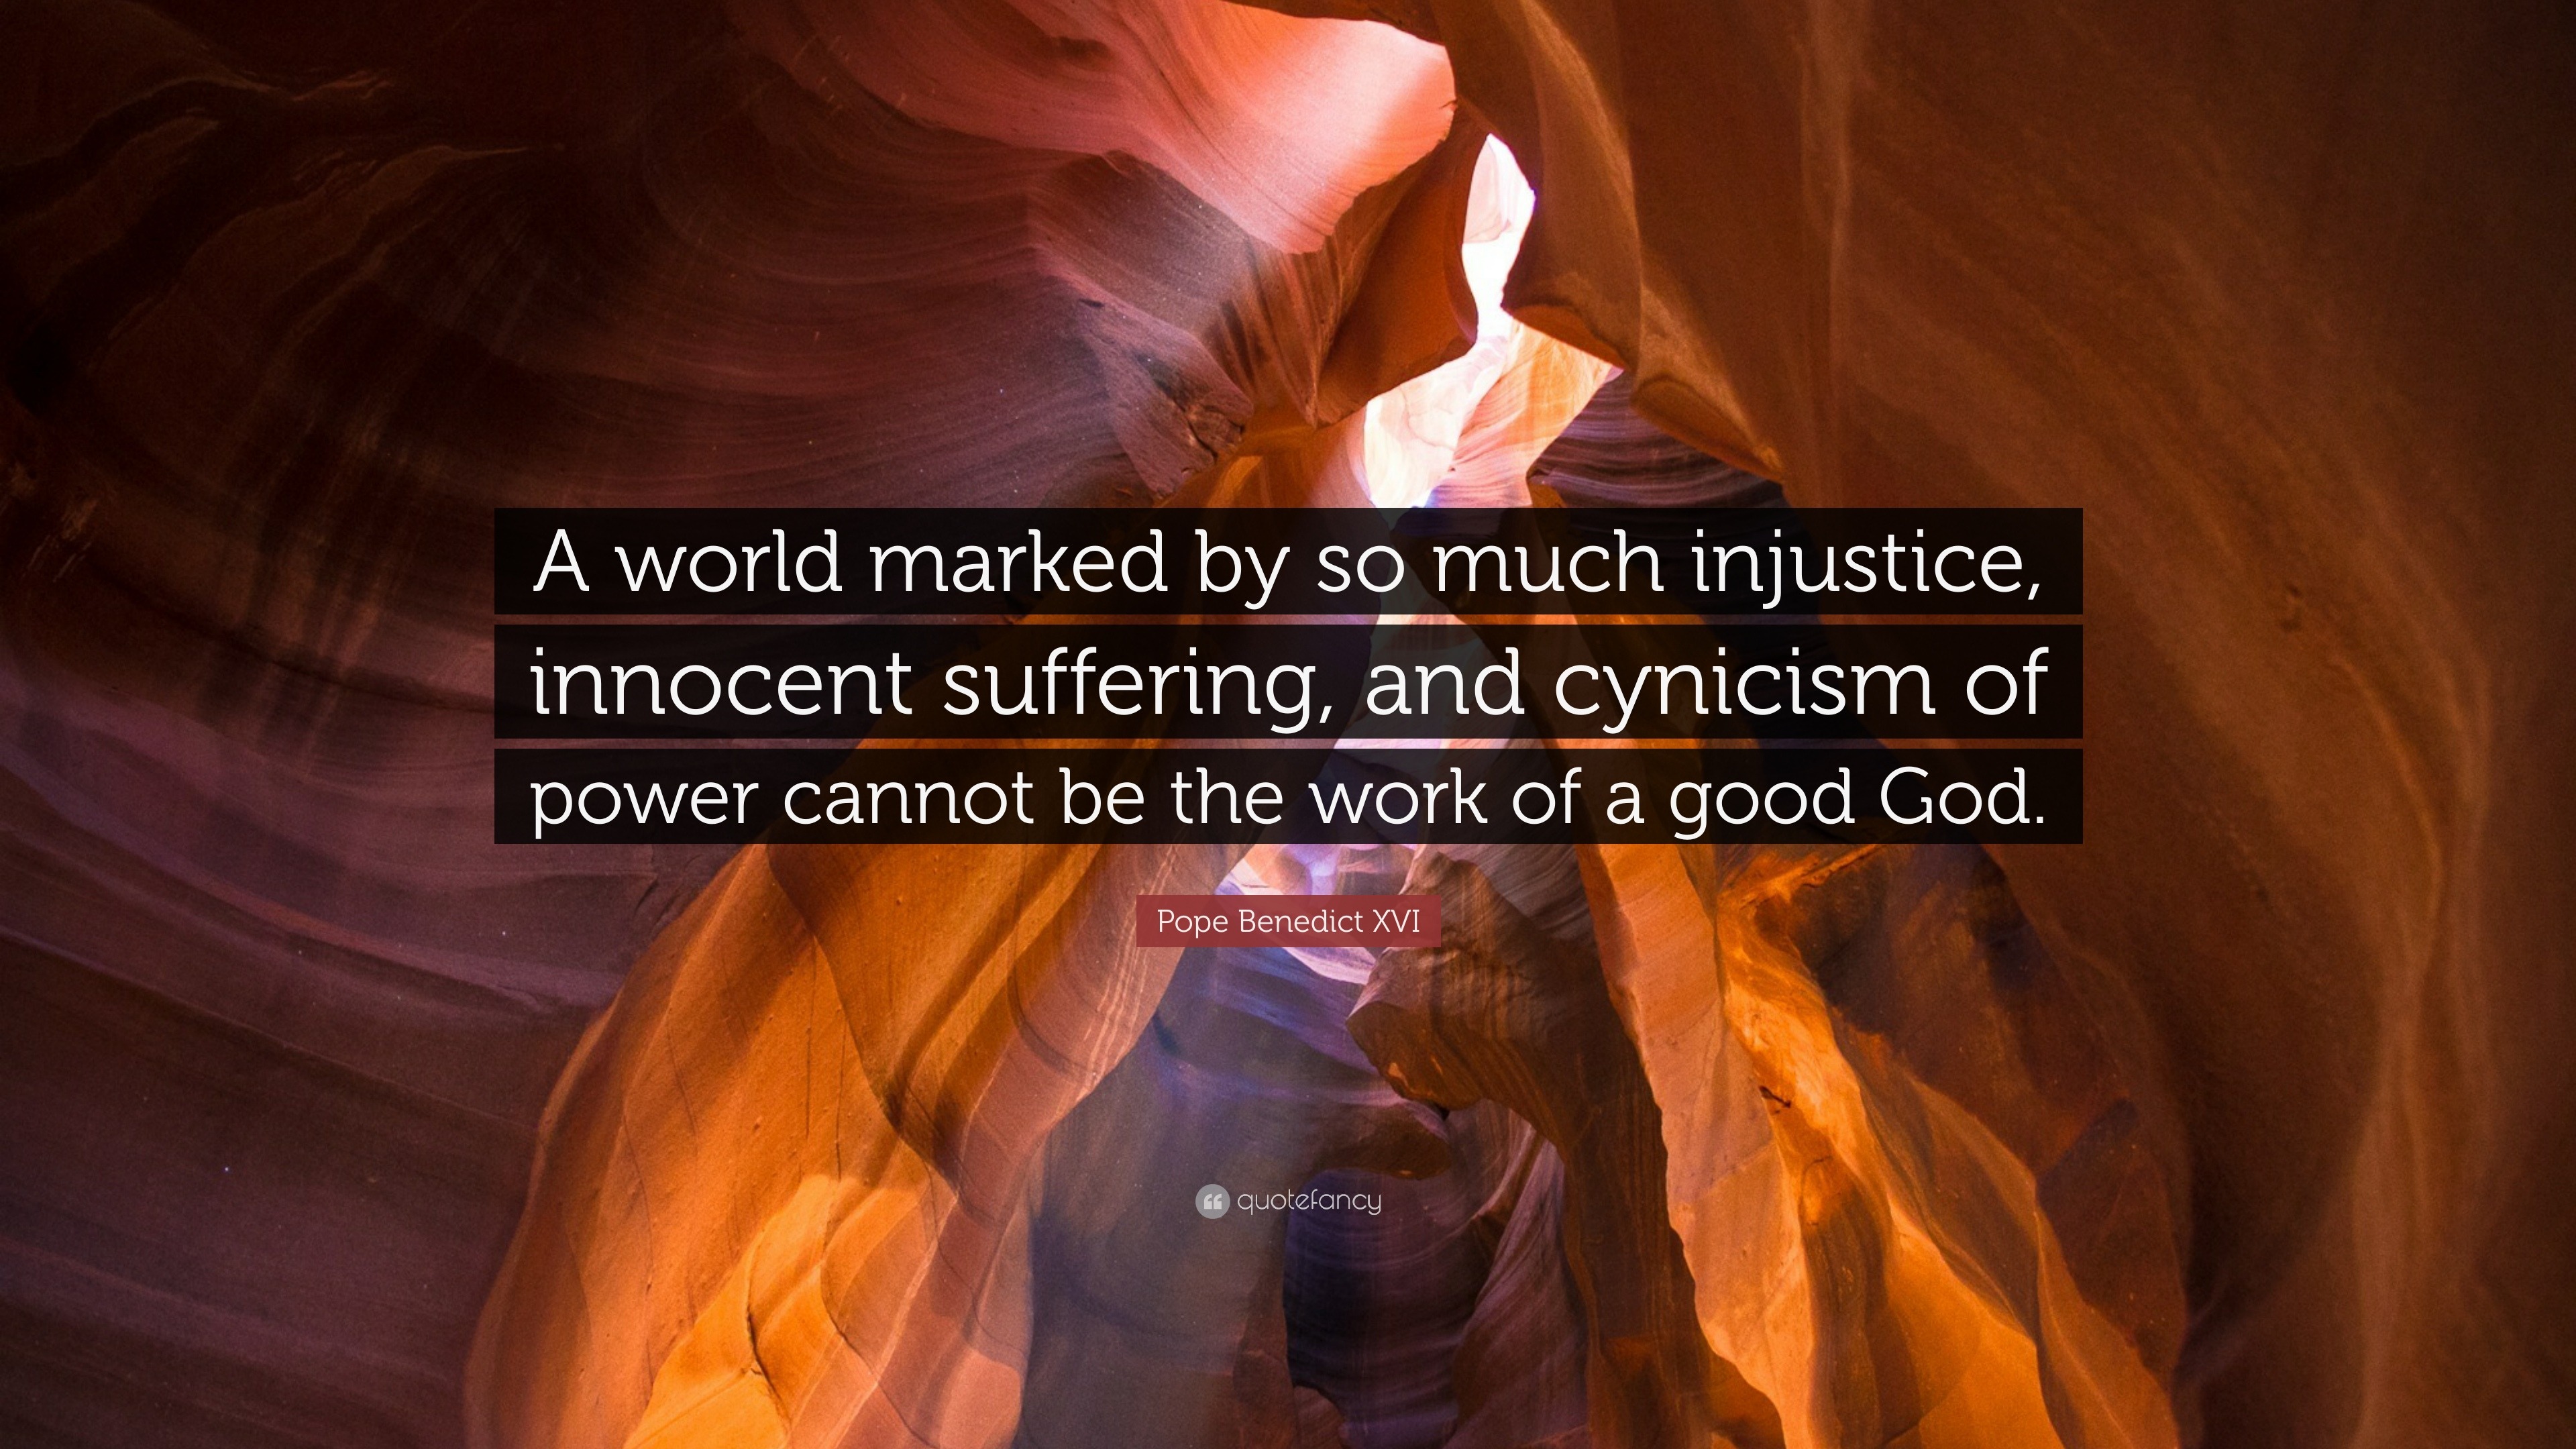 Pope Benedict XVI Quote: “A world marked by so much injustice